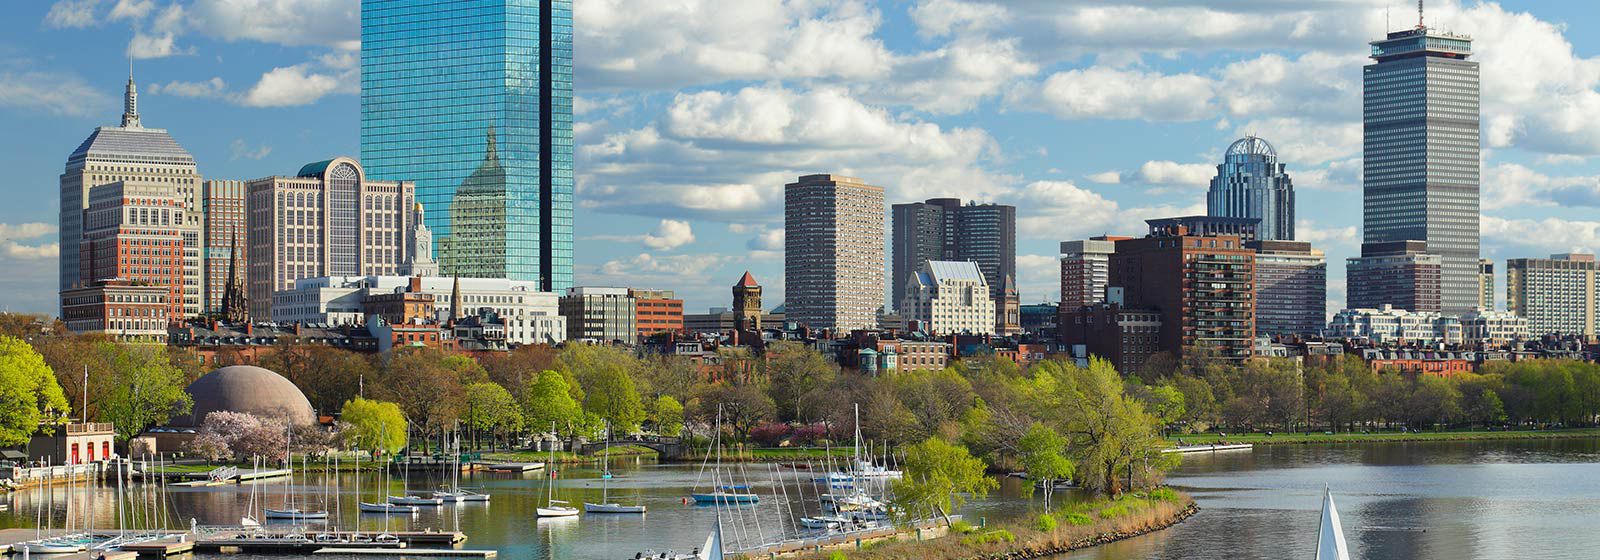 Wider view of Boston city skyline and water